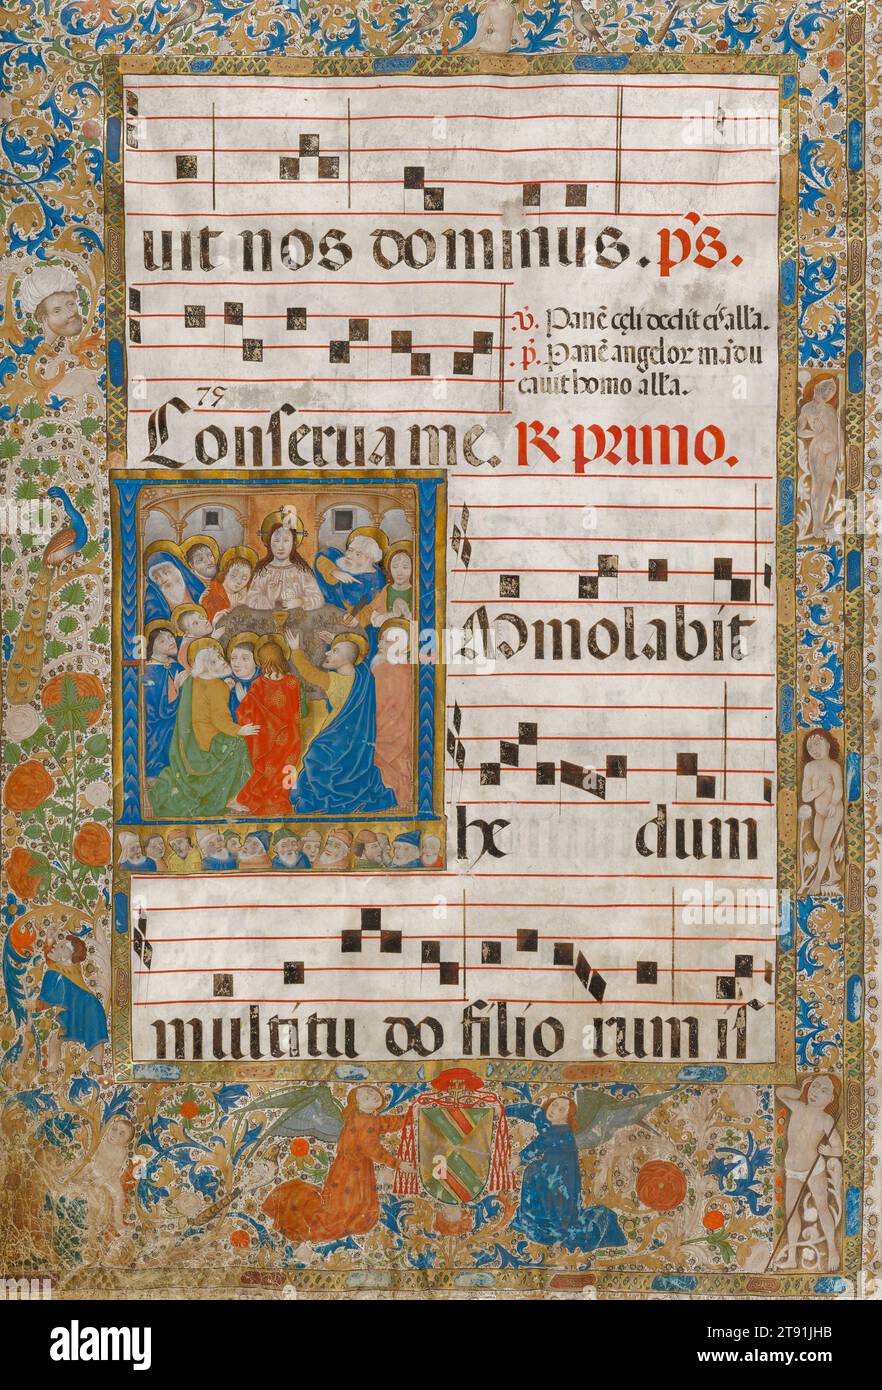 Corpus Christi, page from an Illuminated Antiphonary, 1484, Choirbook Master, Spanish (Toledo), Spanish, late 15th century, 27 1/2 x 18 1/2 in. (69.85 x 46.99 cm)38 1/4 × 30 1/2 in. (97.16 × 77.47 cm) (outer frame), Gouache and gold leaf on parchment, Spain, 15th century, The initial 'I' of Immolabit (He will be sacrificed) shows Christ and the apostles at the Last Supper, a reference to the sacrament of the Eucharist. Along the lower edge, Abraham and the twelve tribes of Israel prefigure this scene. Among the tendril motifs in the border are figures of Adam and Eve and possibly Abel Stock Photo